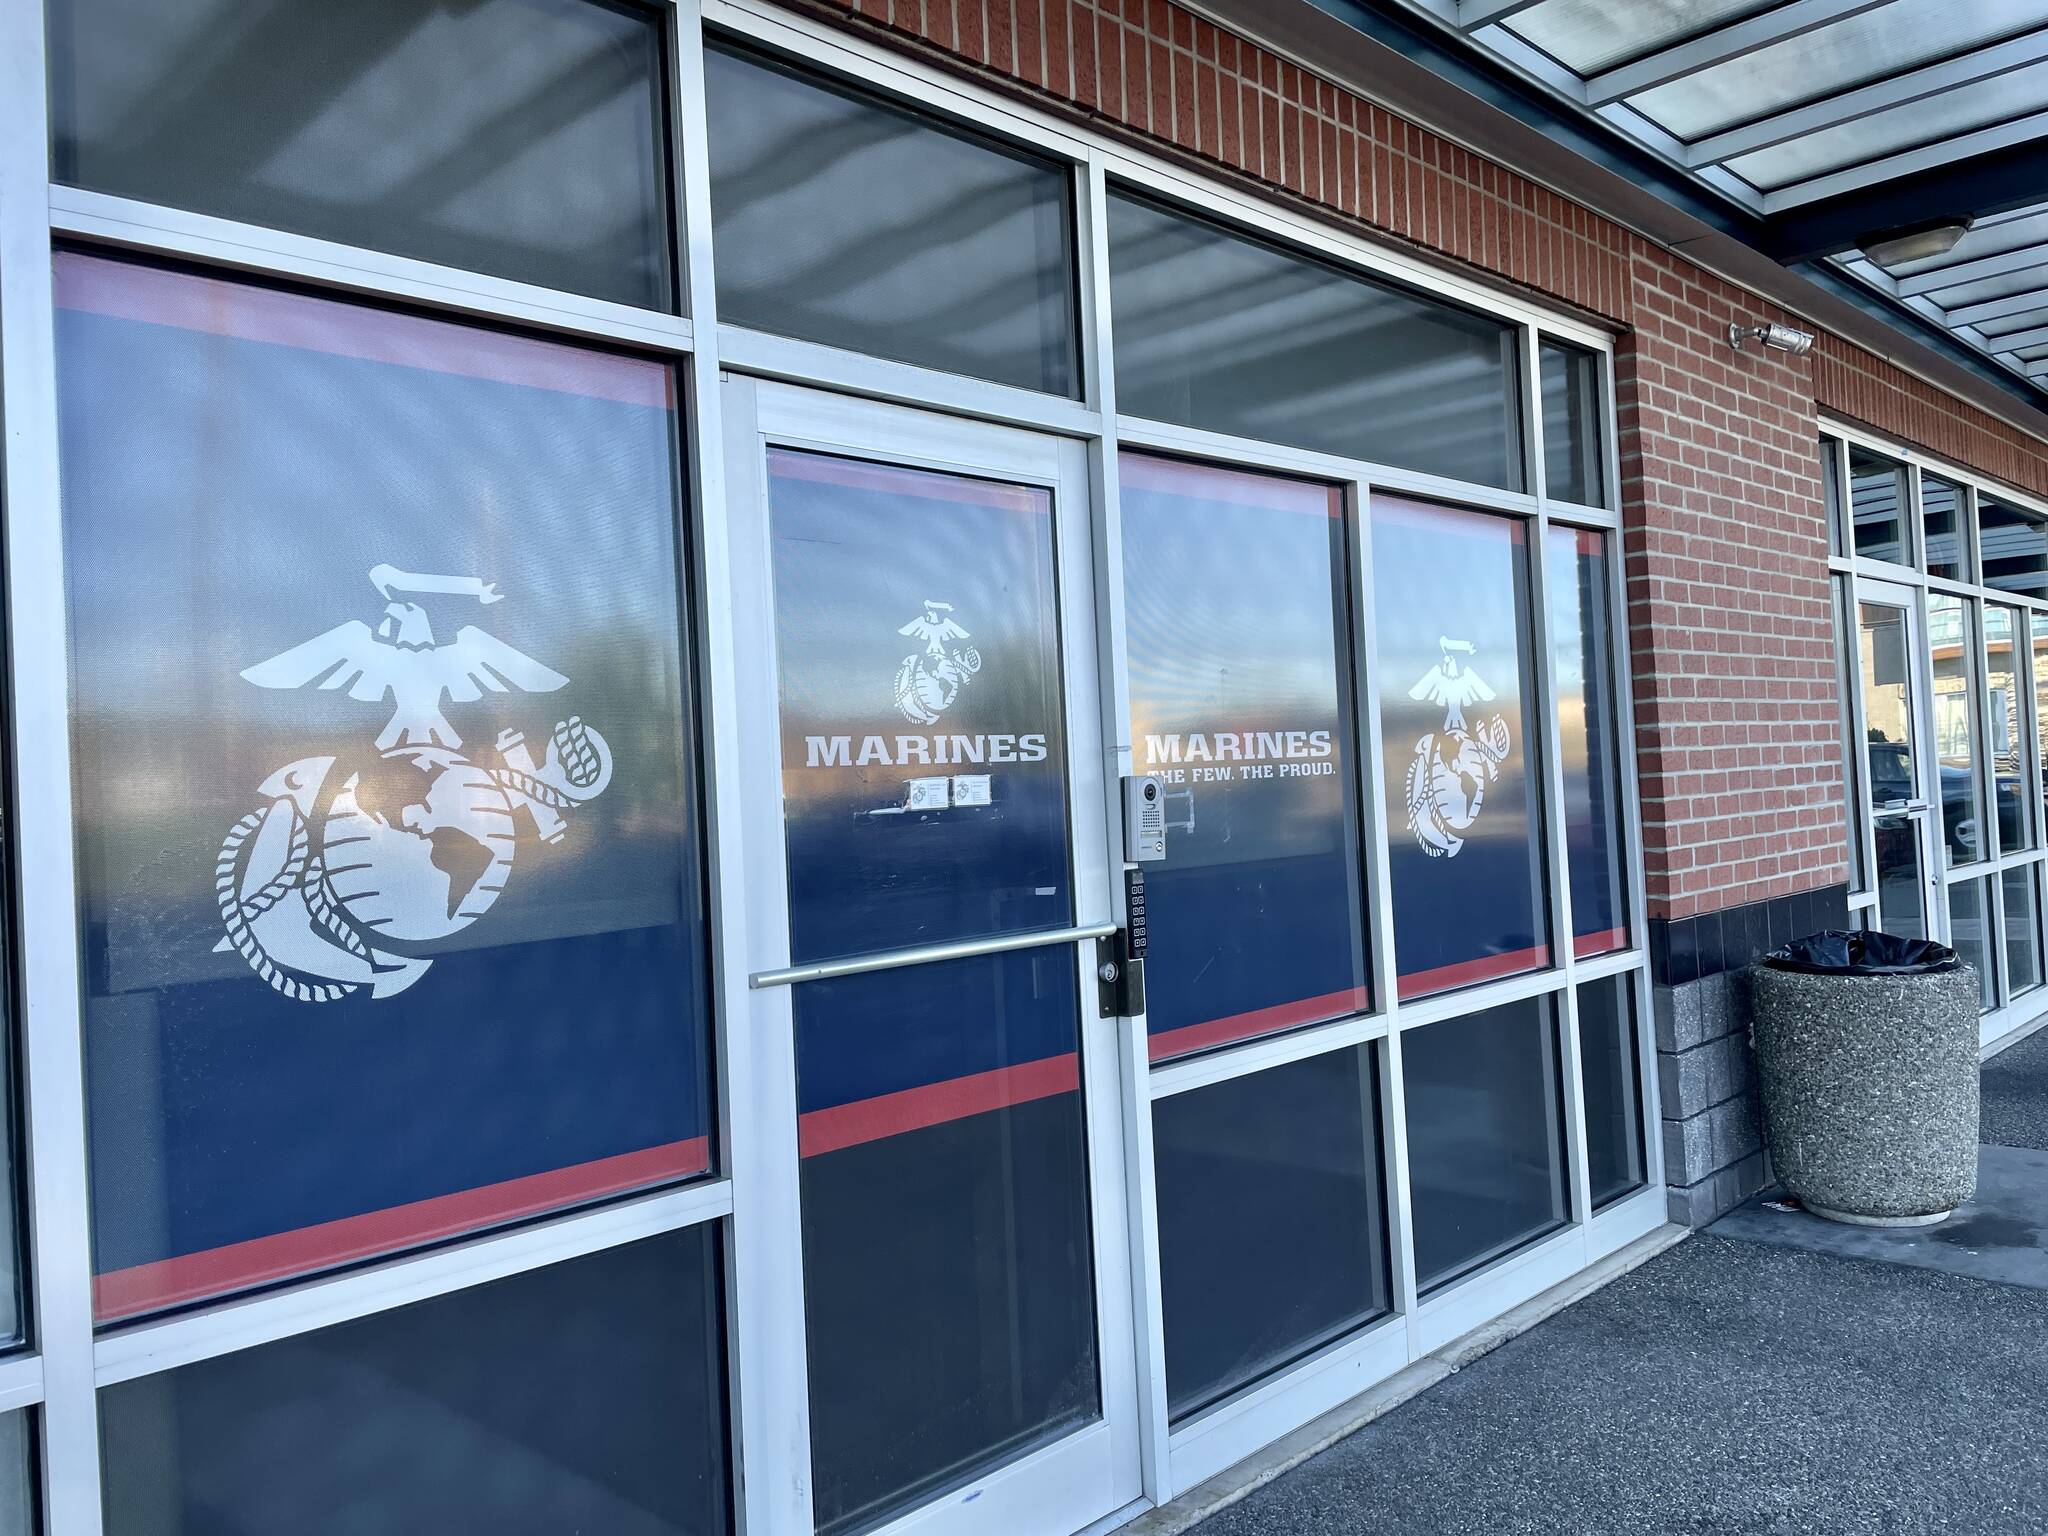 An Aberdeen man broke into a recruiting office on Monday, according to police. (Michael S. Lockett / The Daily World)